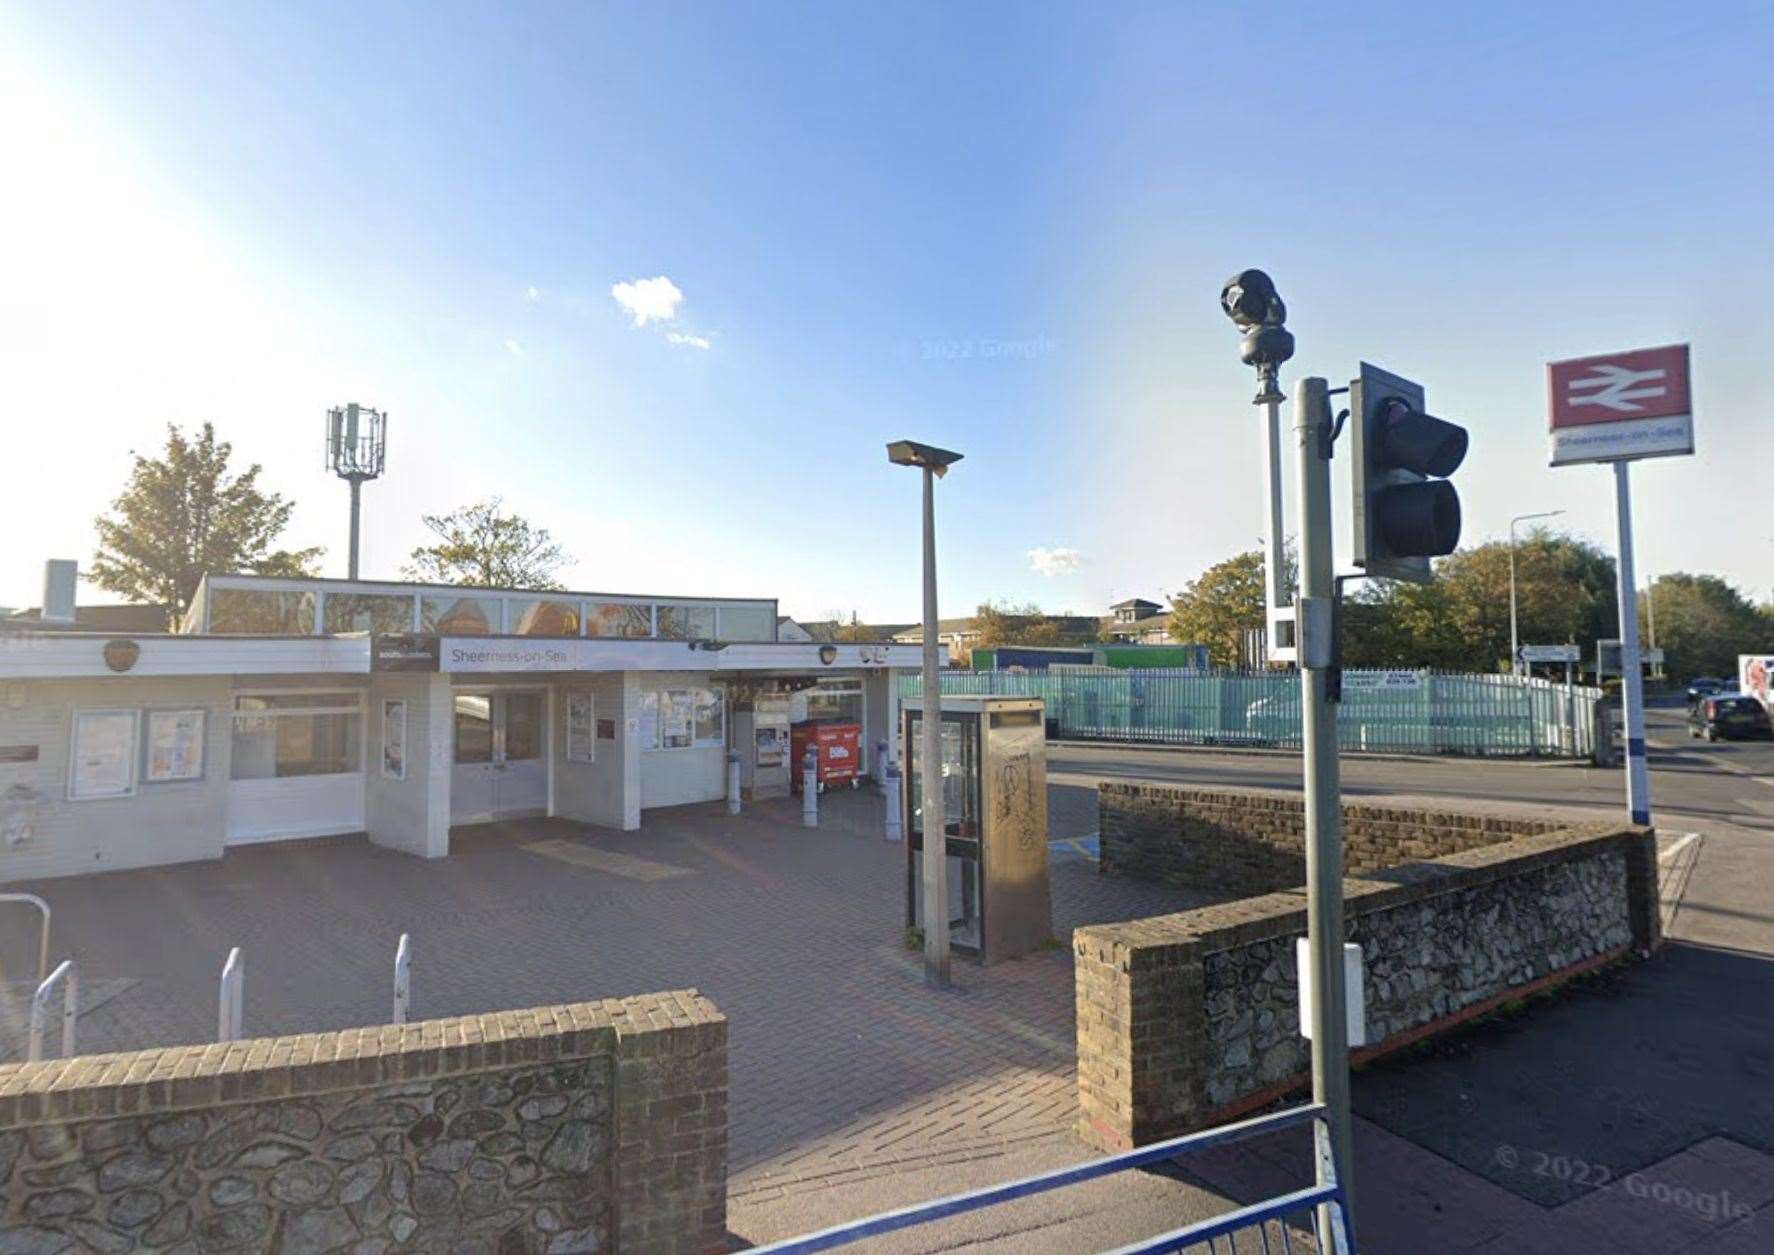 Sheerness-on-Sea railway station. Picture: Google Maps